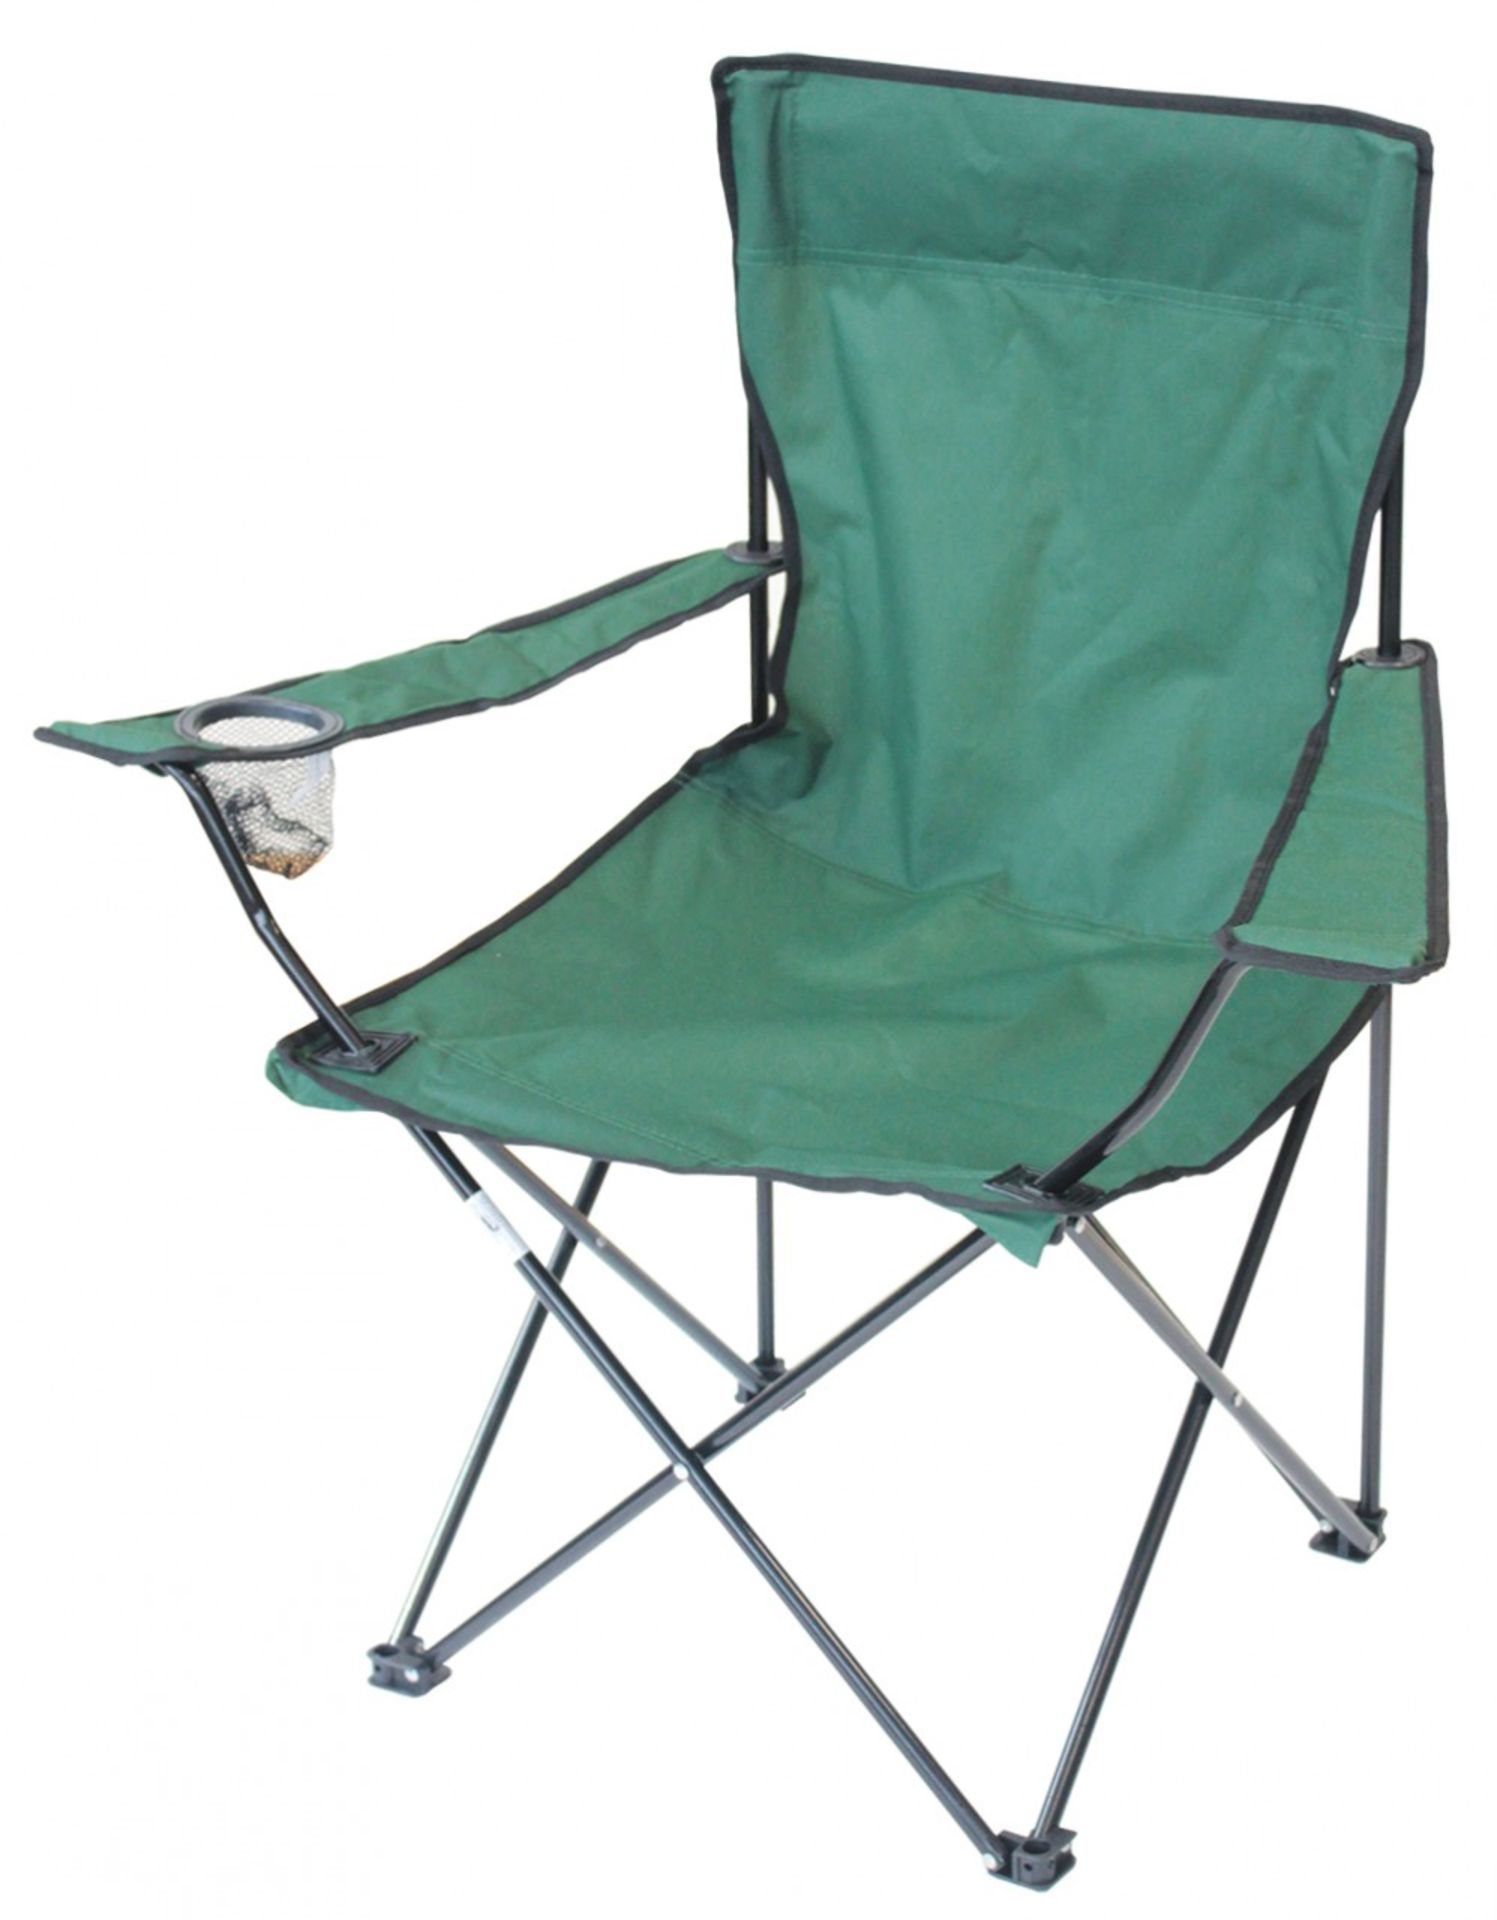 V Brand New Folding Outdoor Chair with Cup Holder RRP £15 (similar Millets) X 2 YOUR BID PRICE TO BE